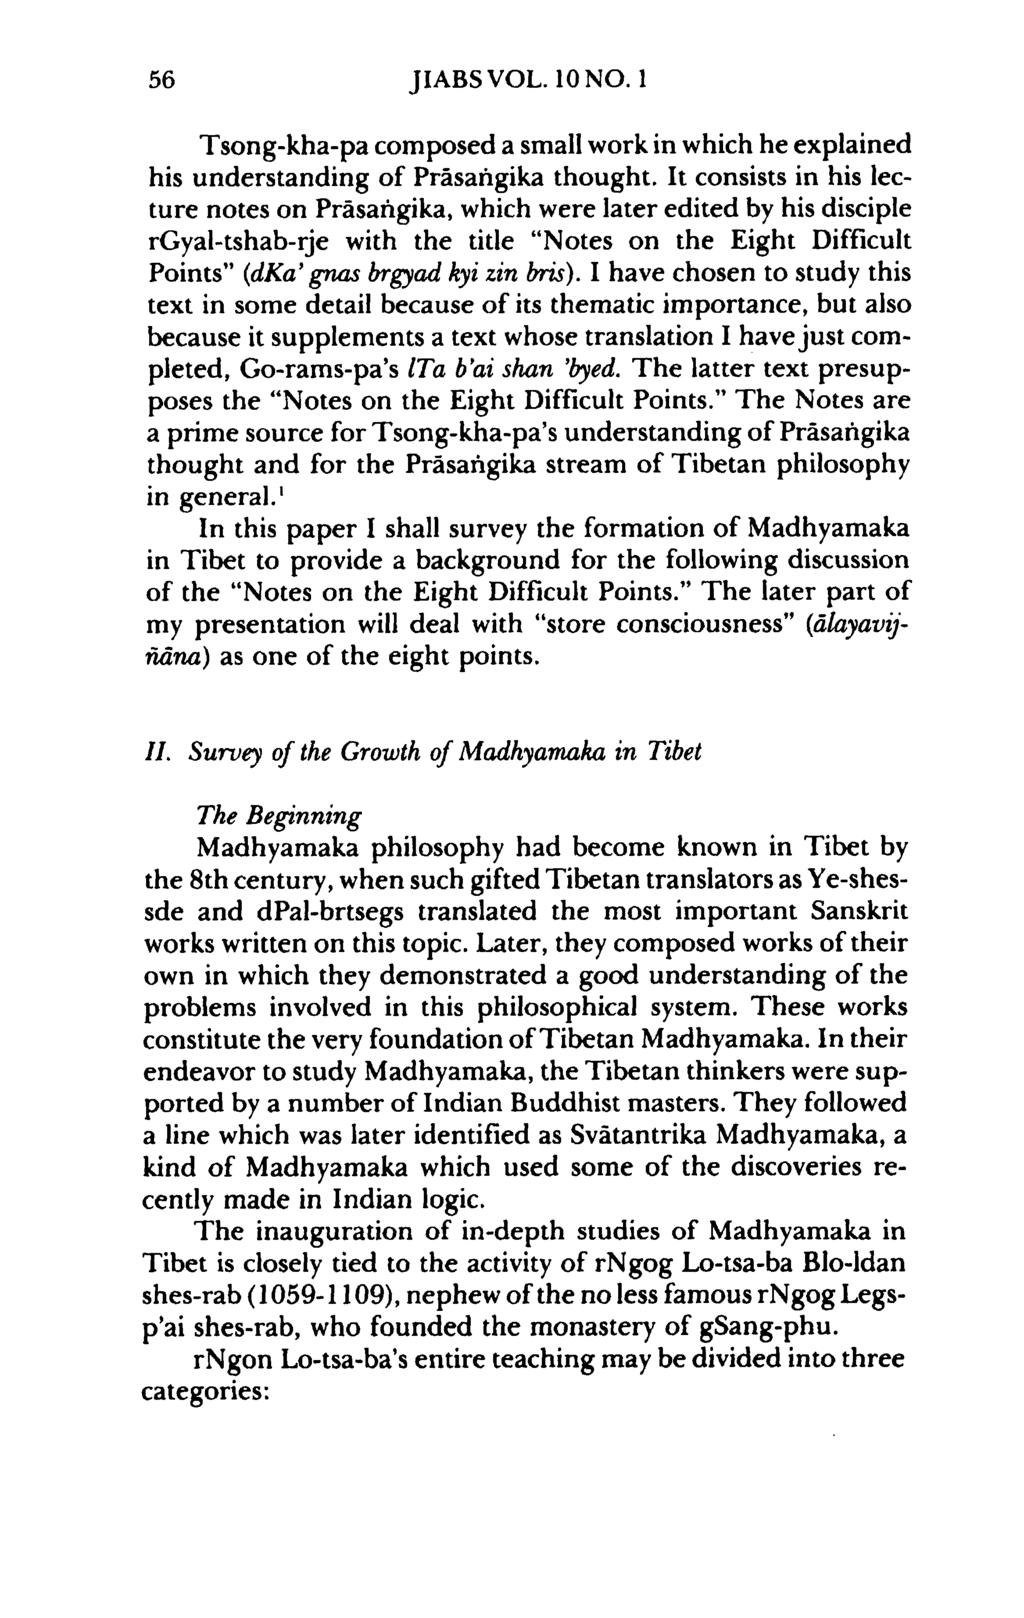 56 JIABSVOL. 10 NO. 1 Tsong-kha-pa composed a small work in which he explained his understanding of Prasangika thought.